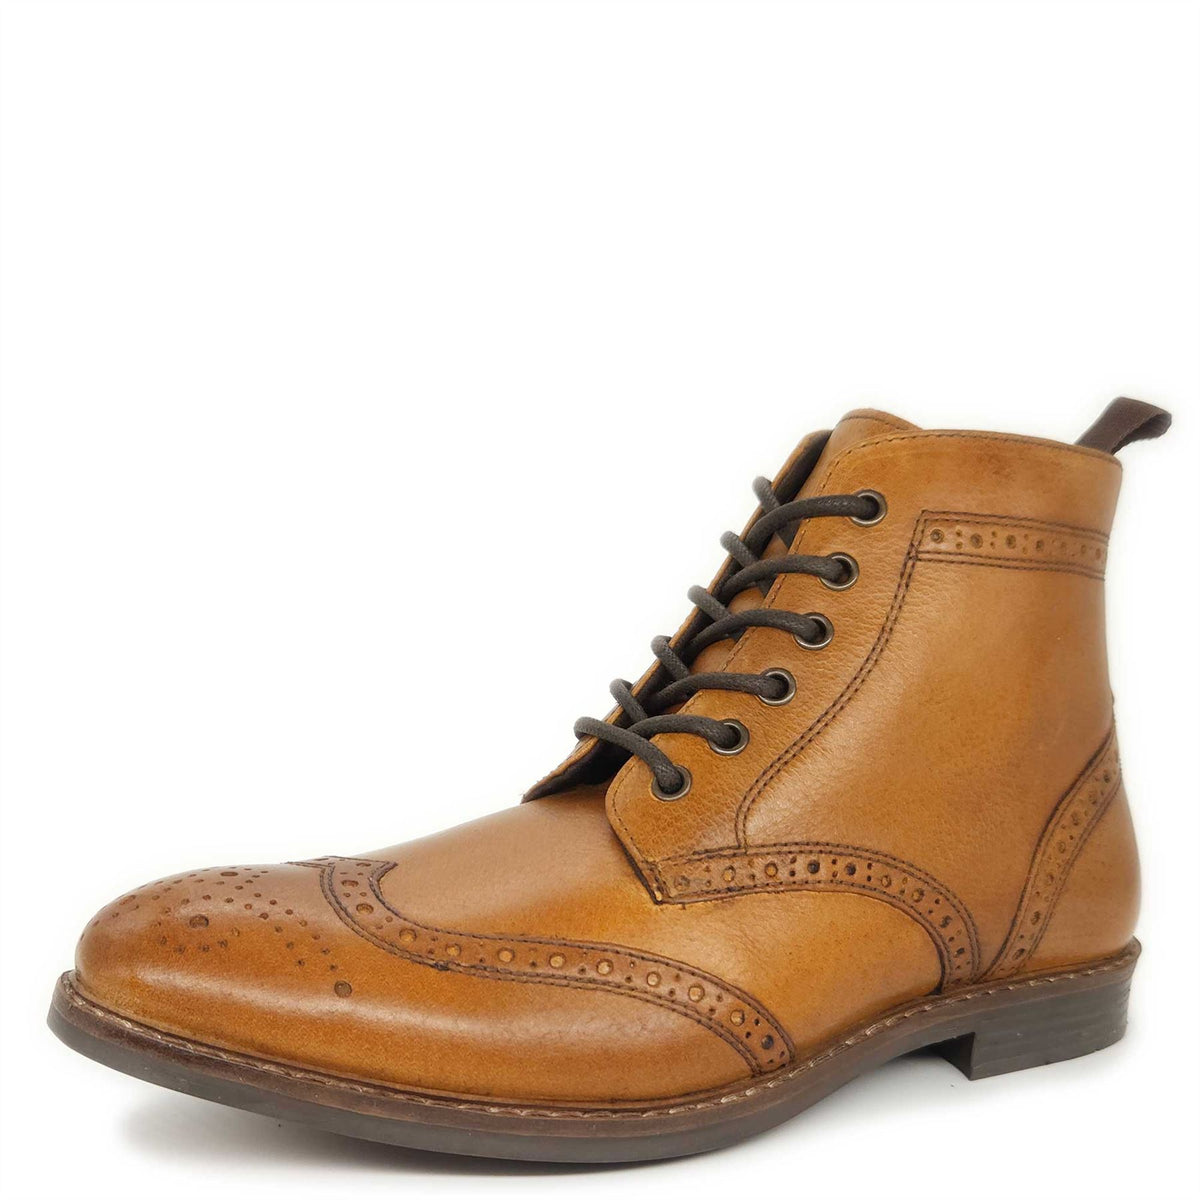 Red Tape Crick Glaven Brogue Lace Up Leather Mens Boots